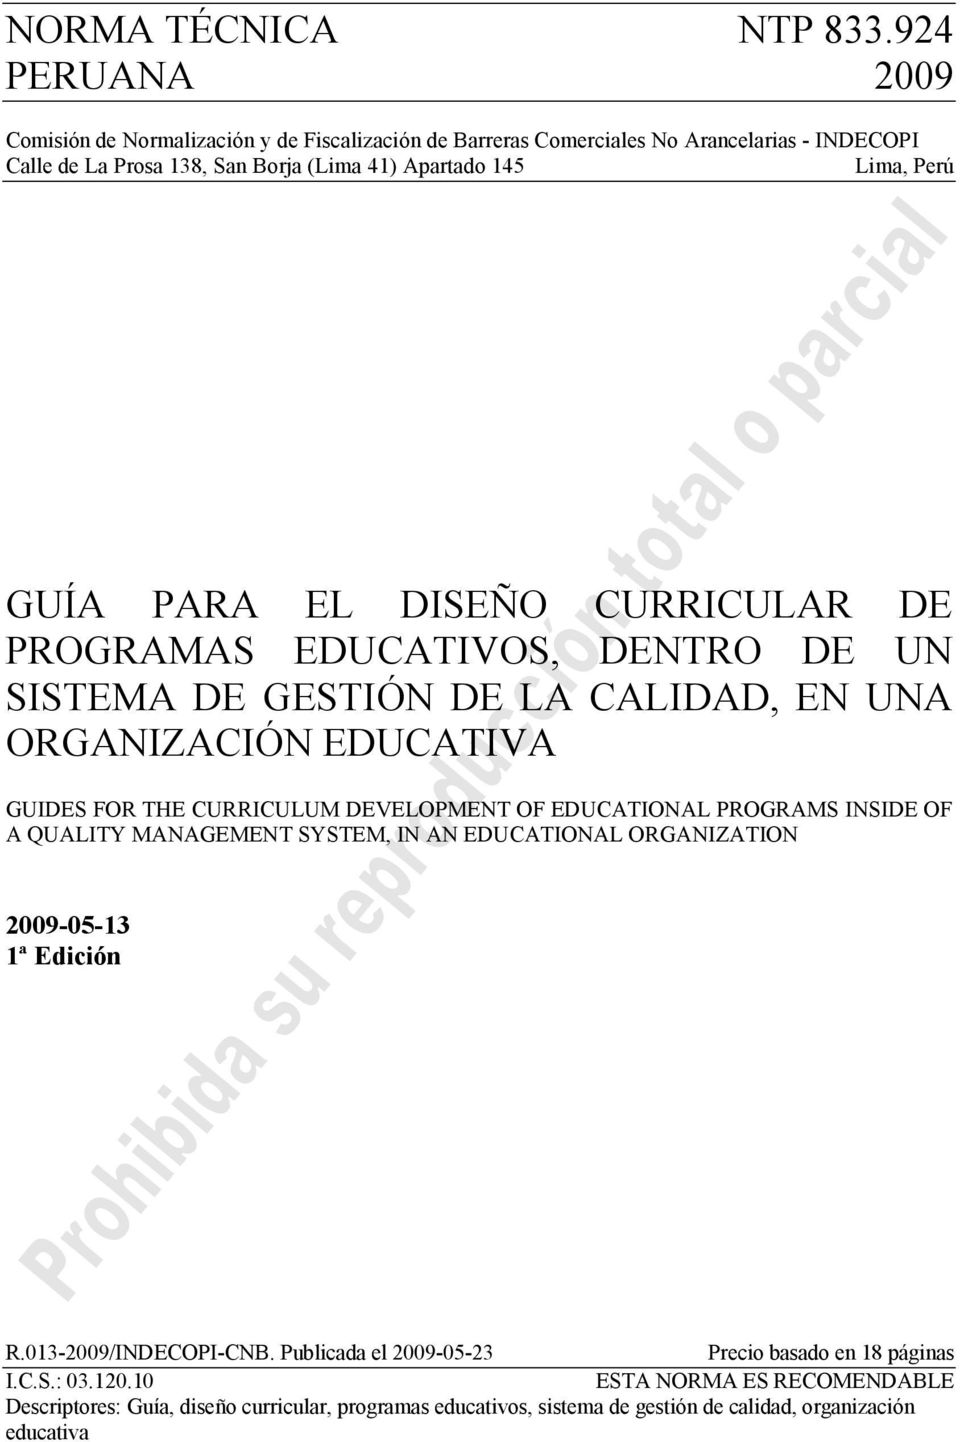 DEVELOPMENT OF EDUCATIONAL PROGRAMS INSIDE OF A QUALITY MANAGEMENT SYSTEM, IN AN EDUCATIONAL ORGANIZATION 2009-05-13 1ª Edición R.013-2009/INDECOPI-CNB.